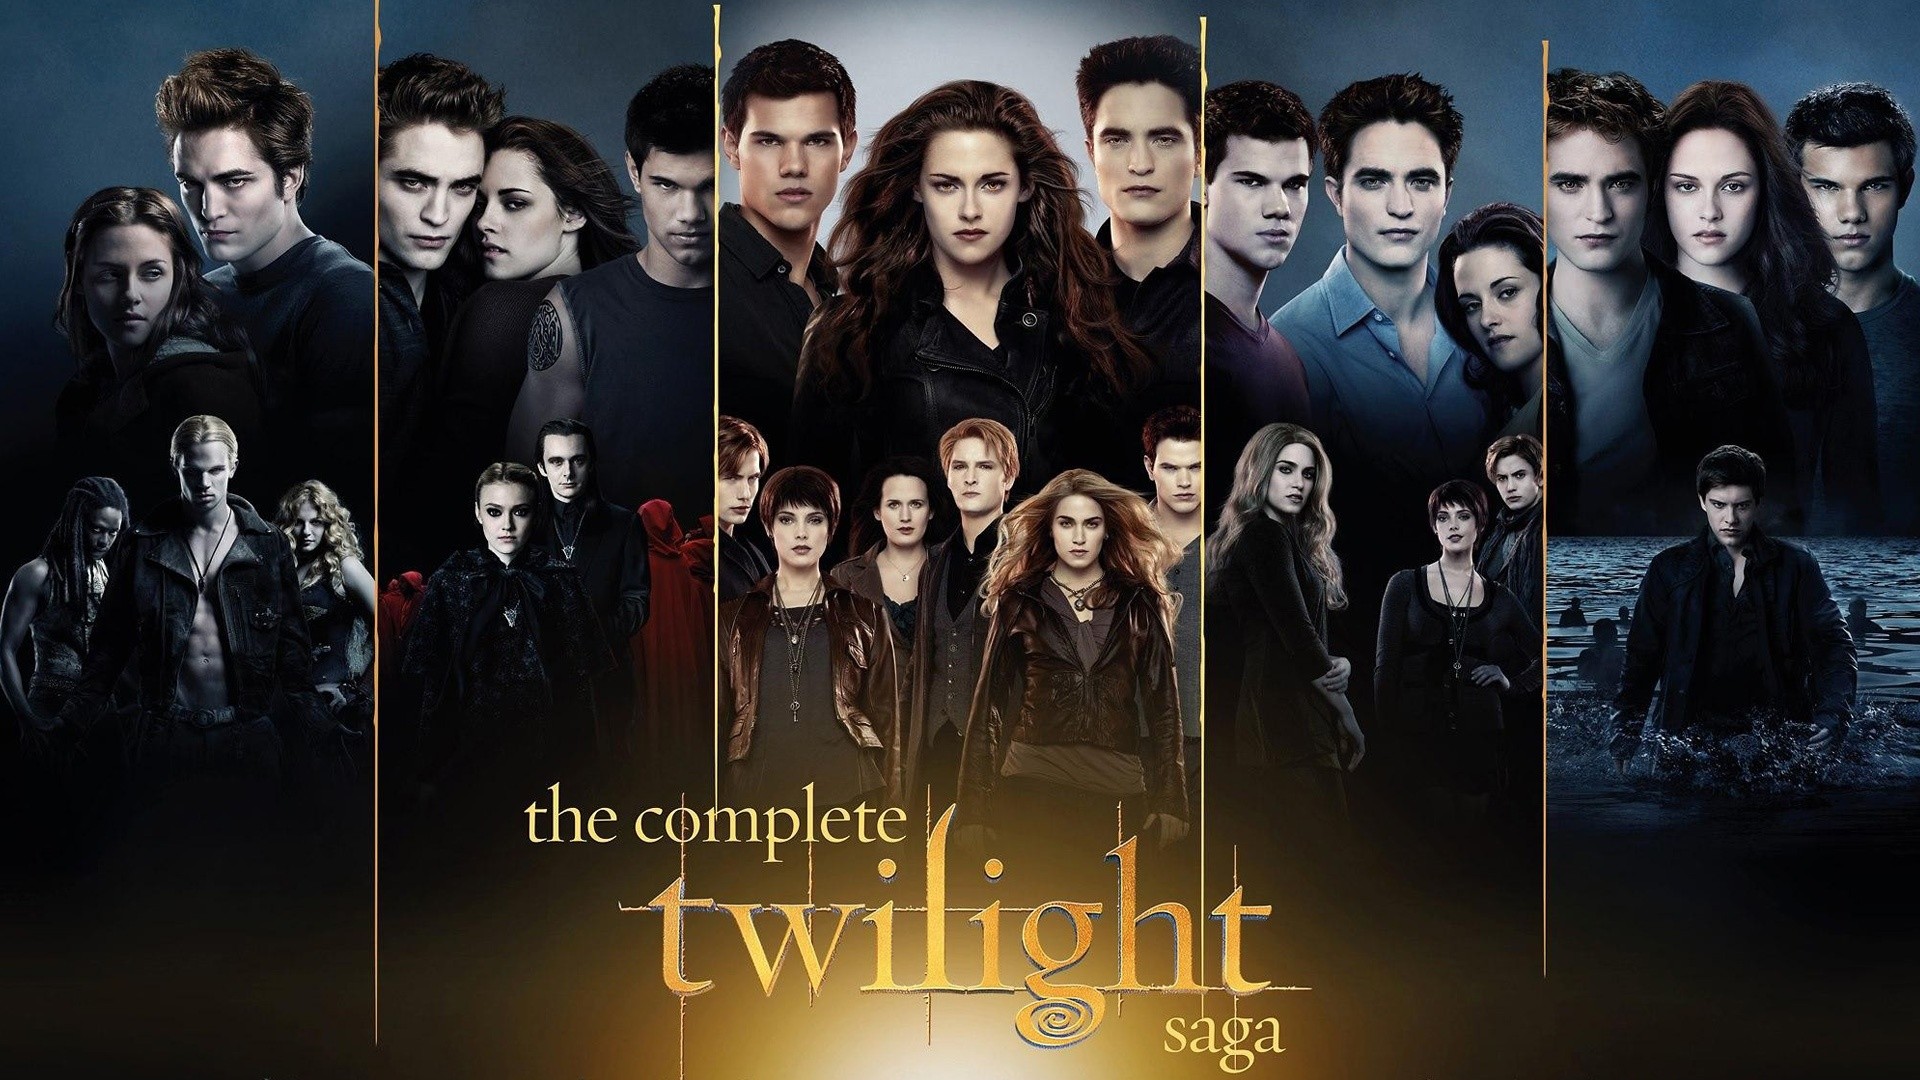 Twilight saga wallpapers pictures